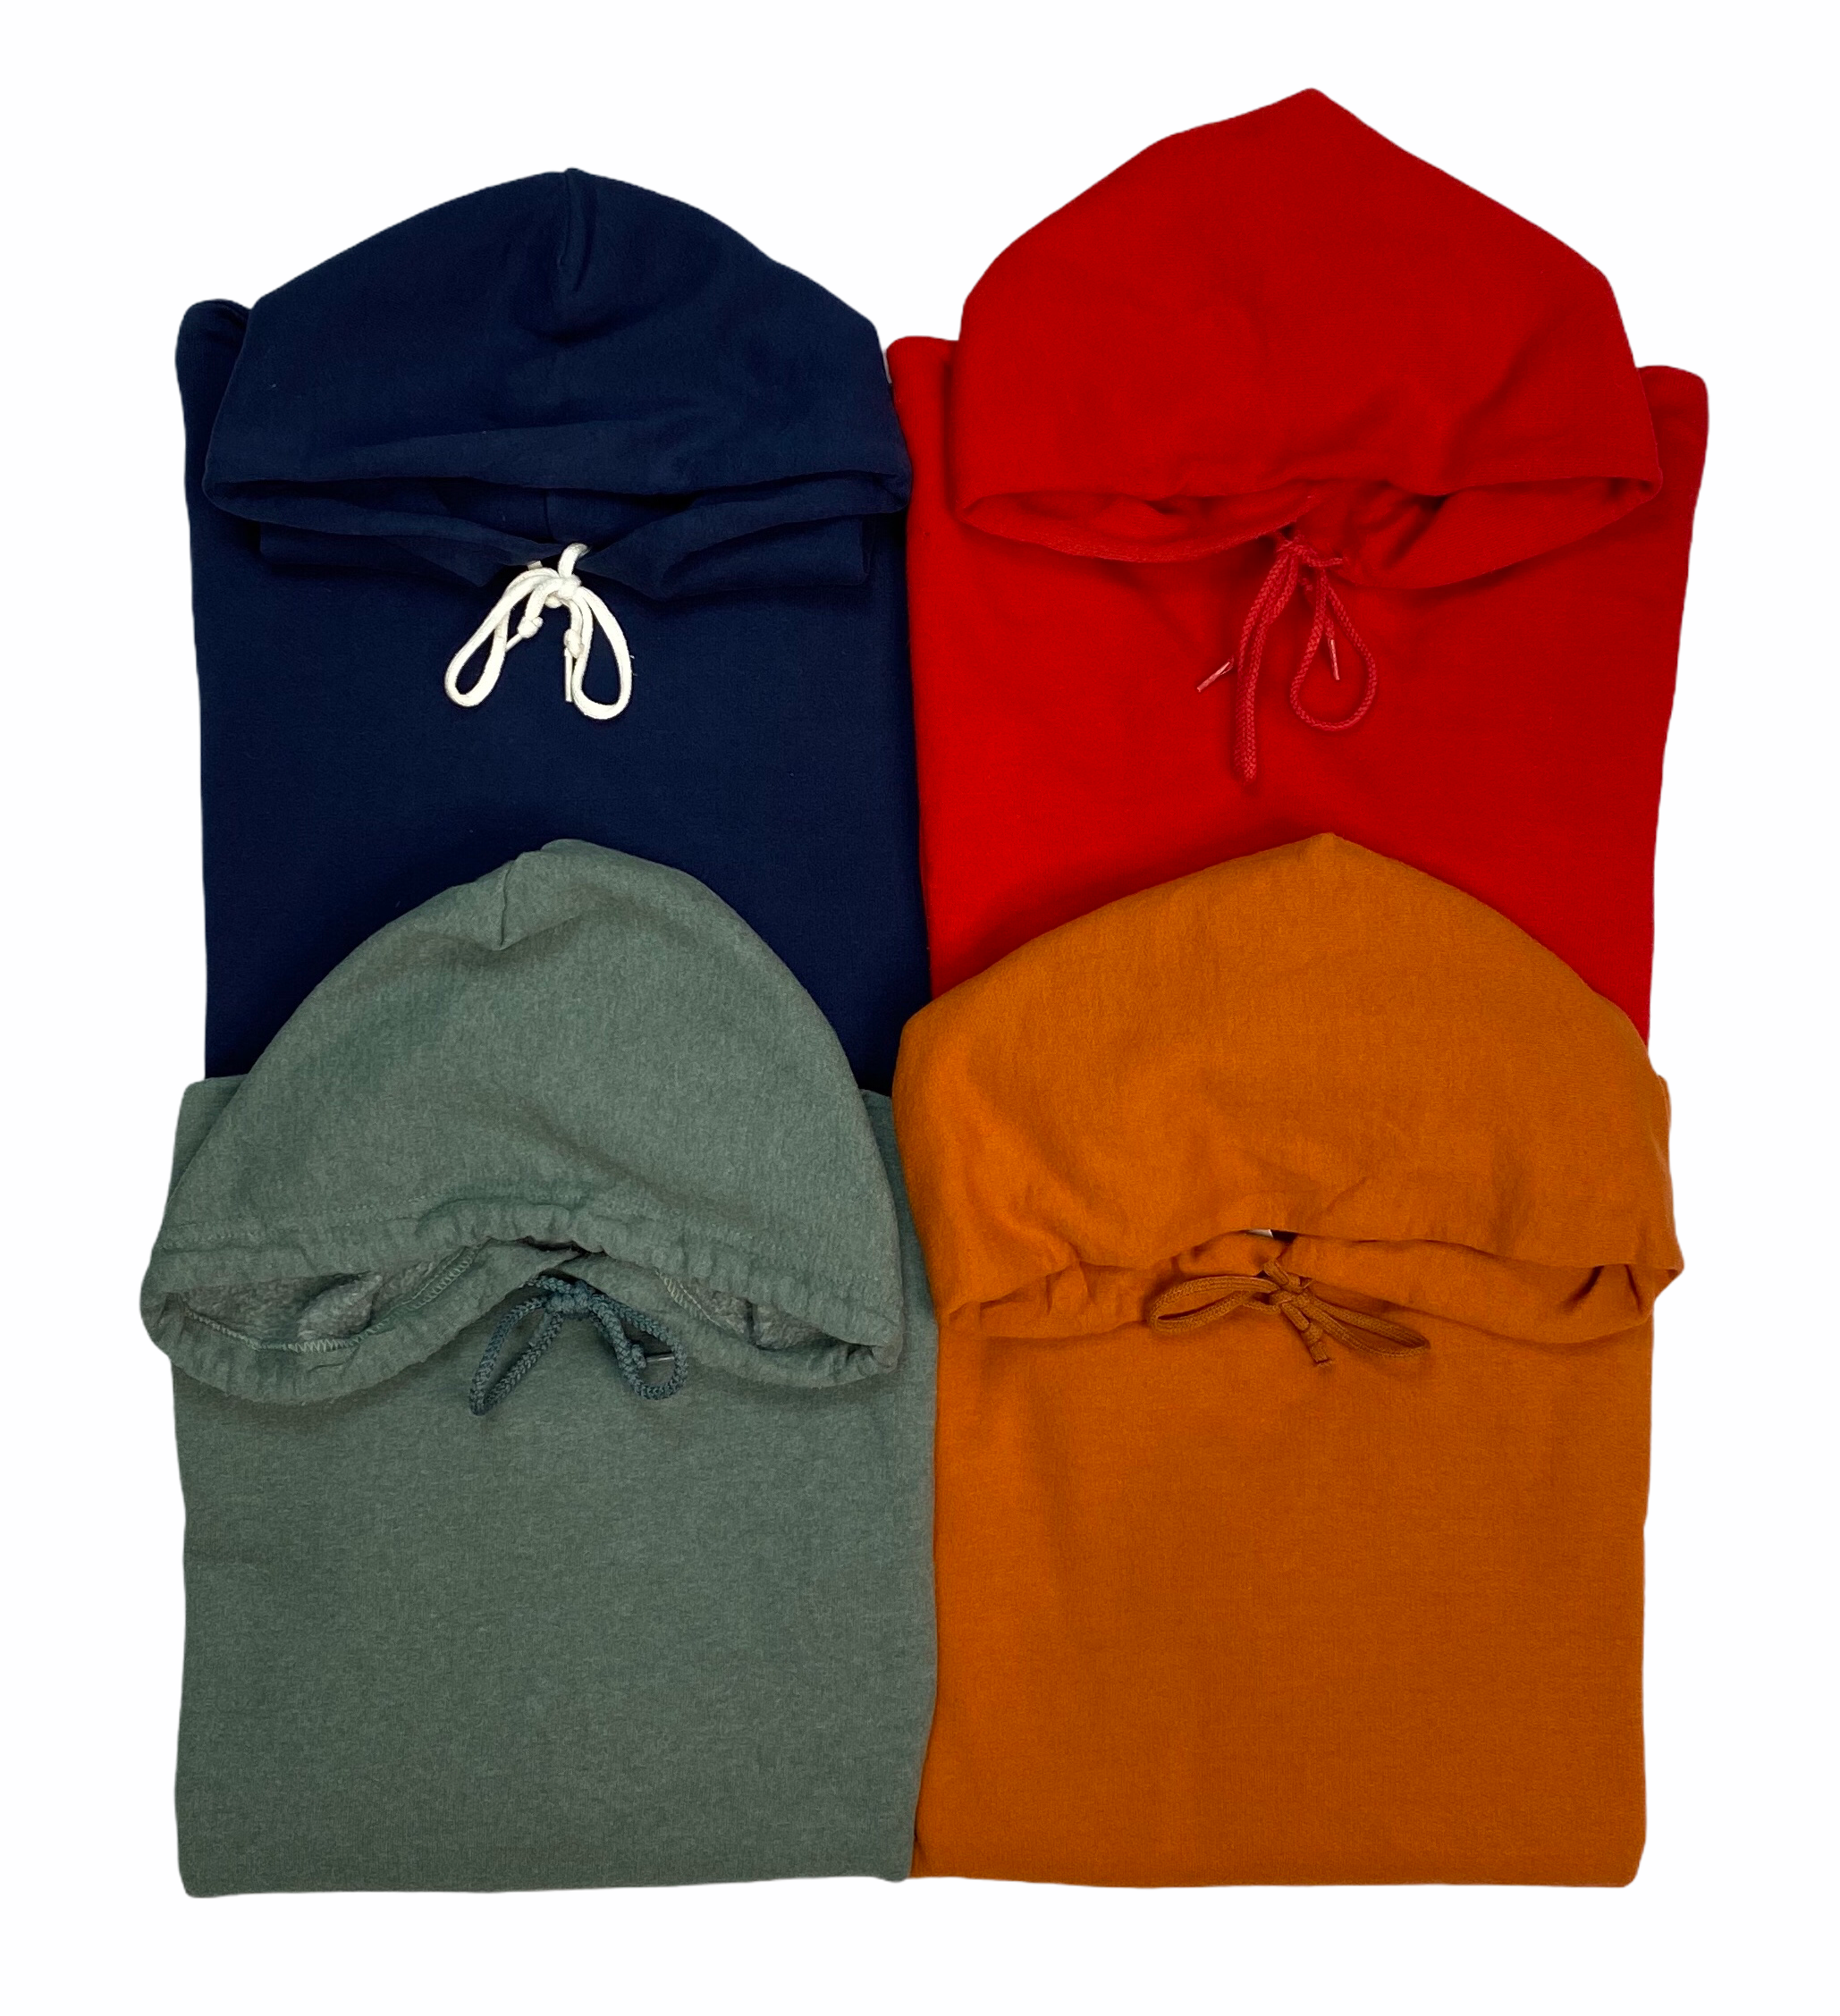 An image of four different vintage men’s hooded sweatshirts